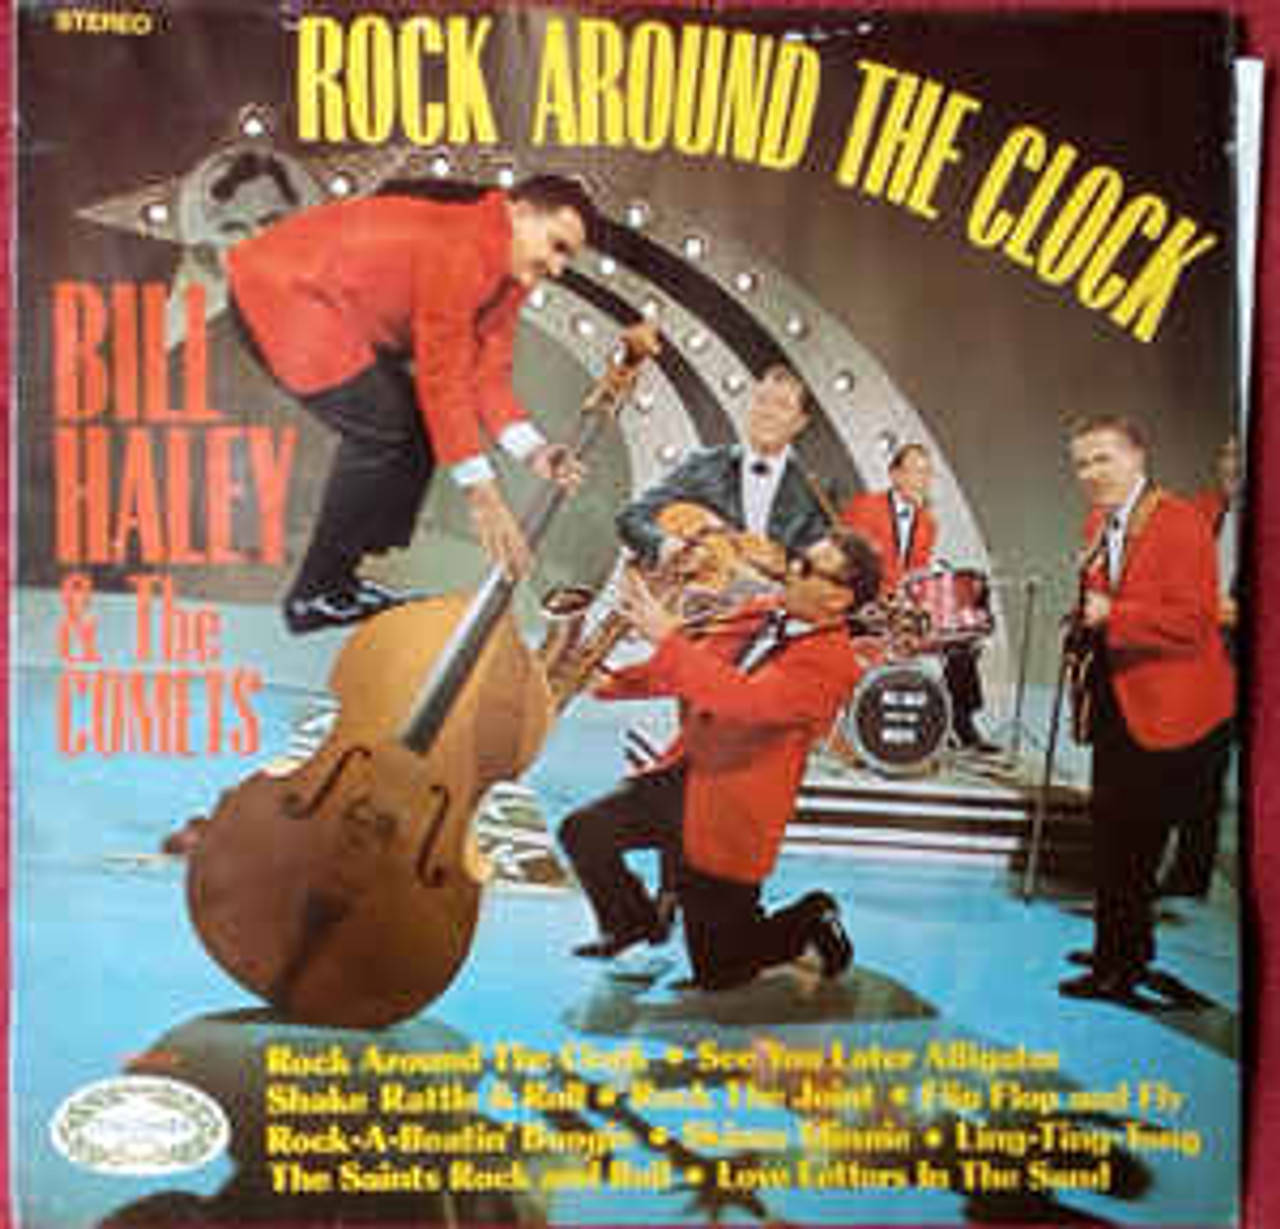 Bill Haley And The Comets Updated Album Wallpaper